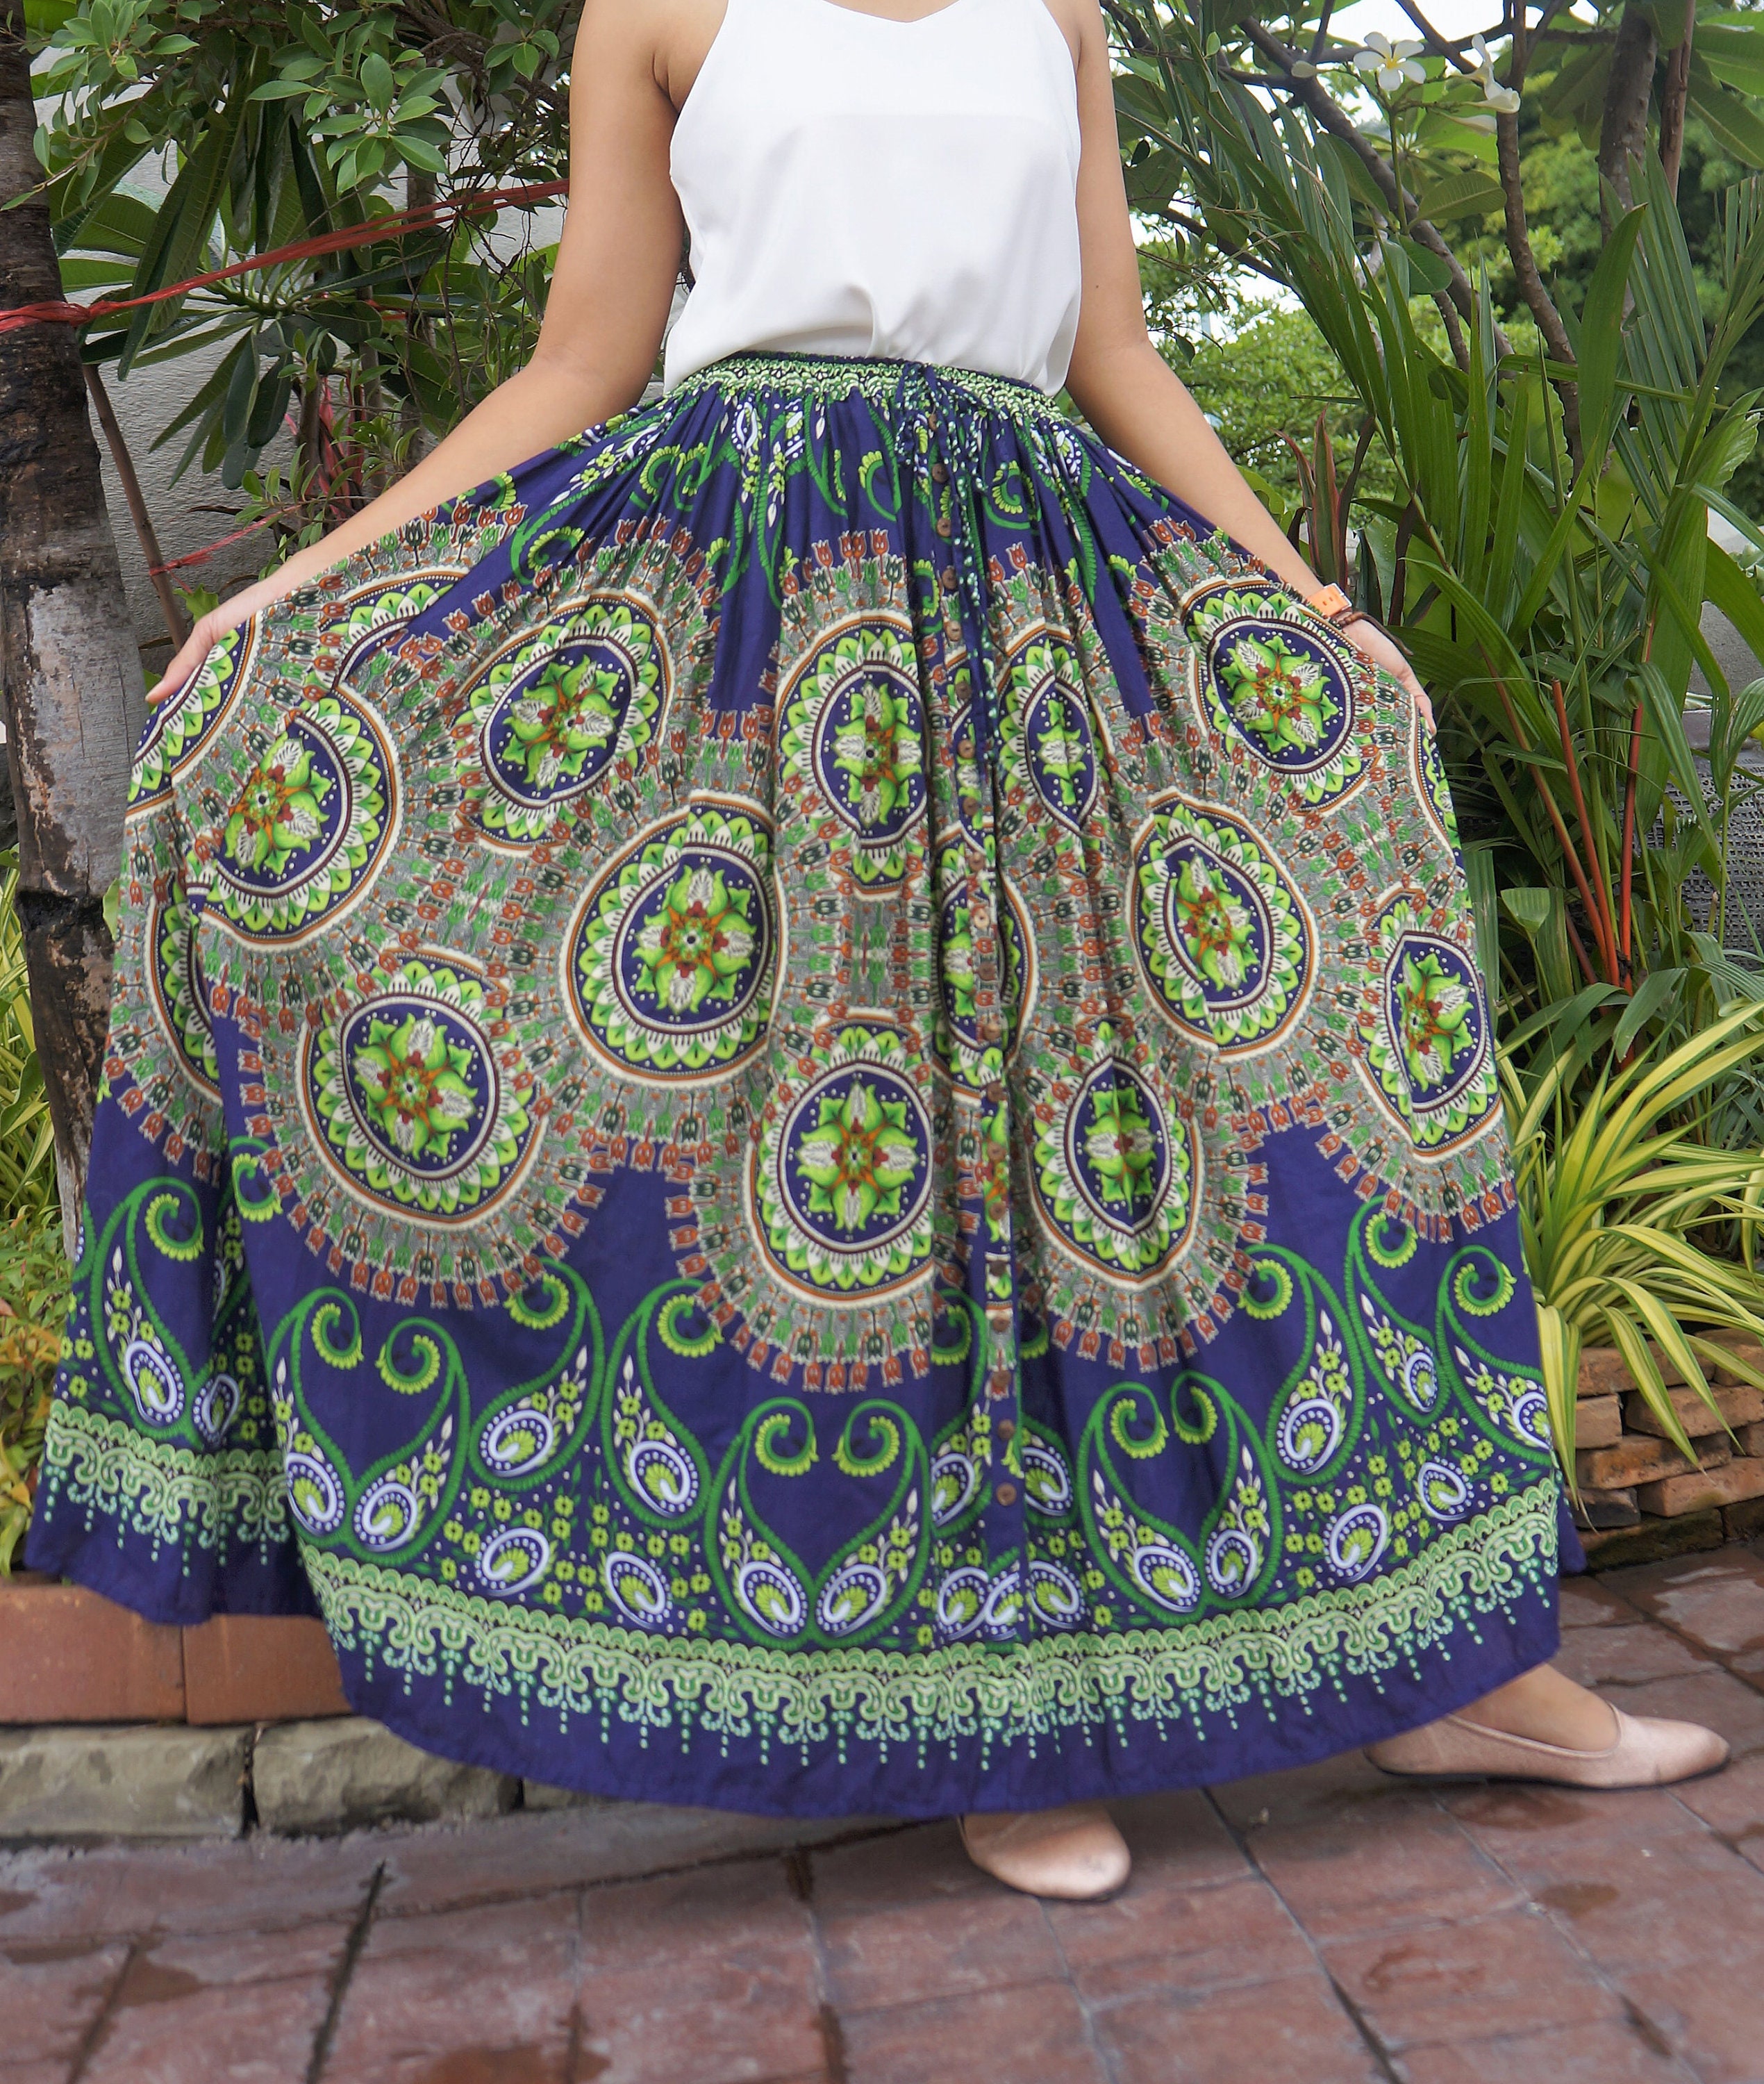 Gypsy Skirt With Floral Mandala Tribal Patterned Design Full - Etsy